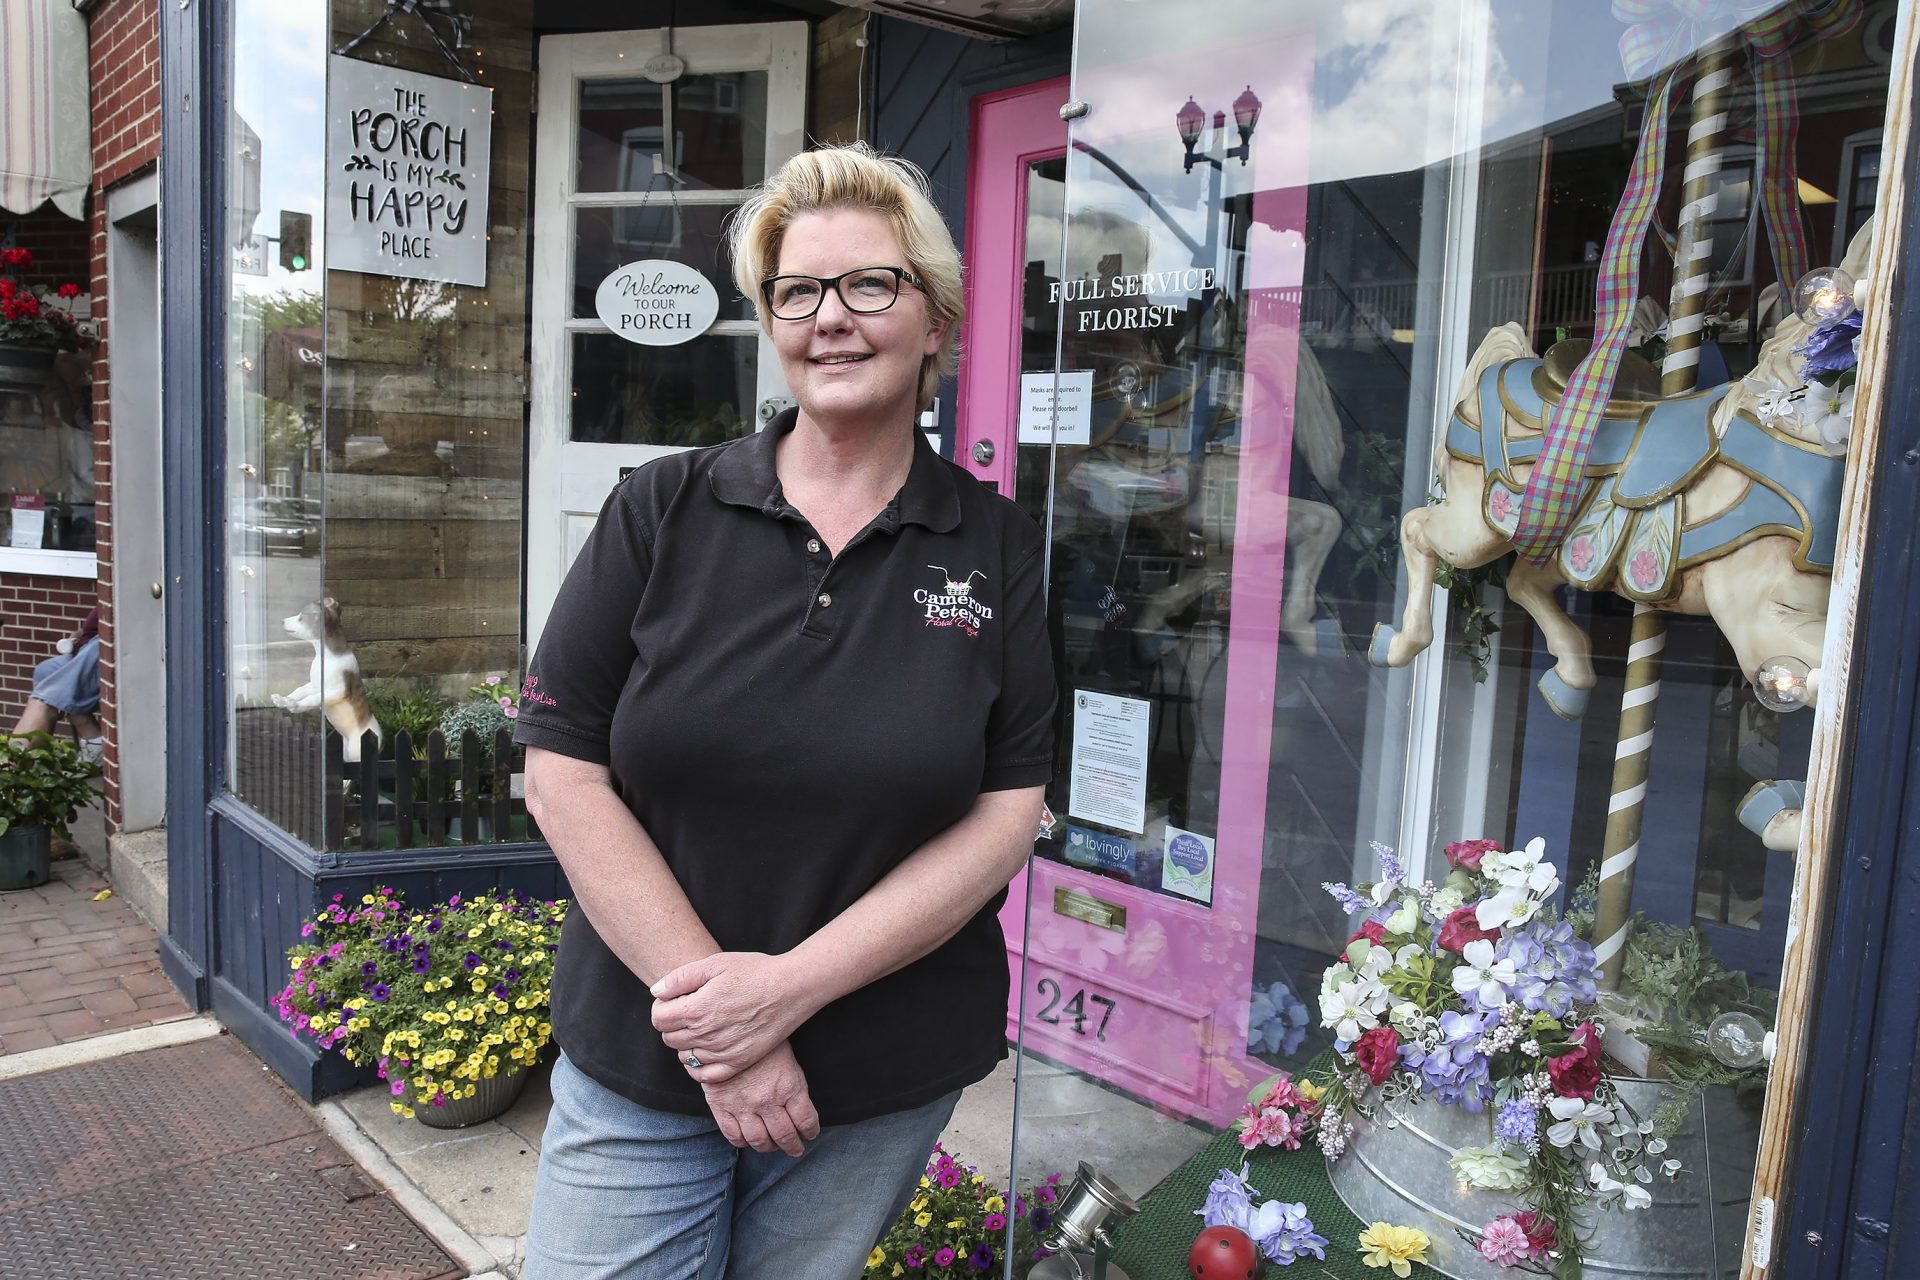 The state denied Cameron Peters' waiver to fulfill online orders from her Phoenixville flower shop. But, after being closed for a month, she confirmed with the governor's office that she didn't actually need a waiver to do this, after all.